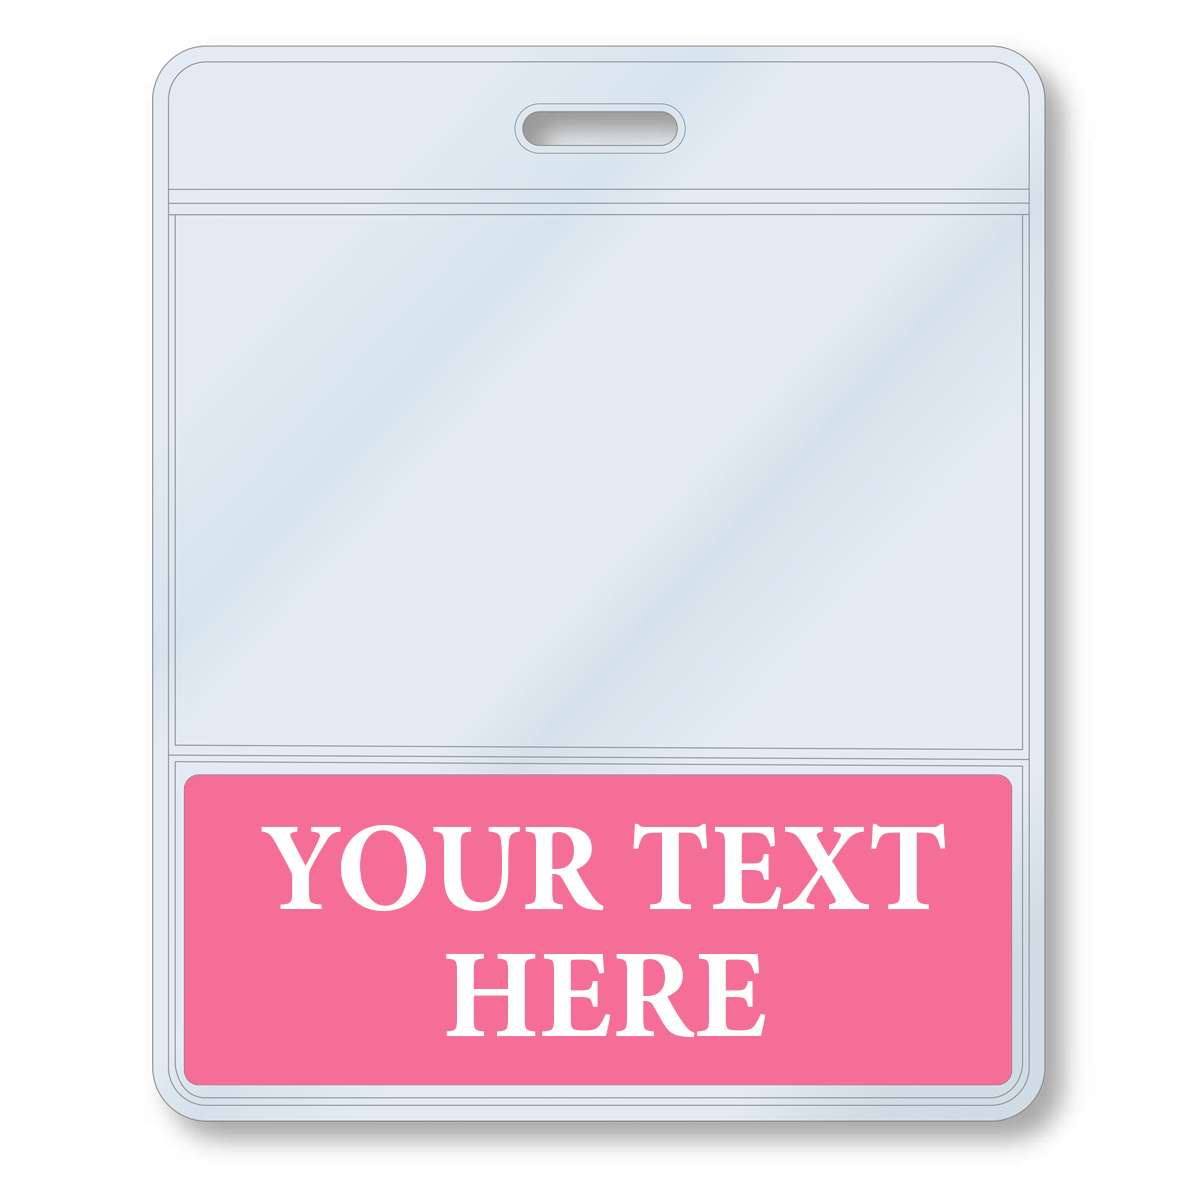 A Custom Printed BadgeBottoms® Horizontal (Badge Holder & Badge Buddy IN ONE) with a clear top section and a pink bottom section labeled "Your Text Here," perfect for adding your customizable title.